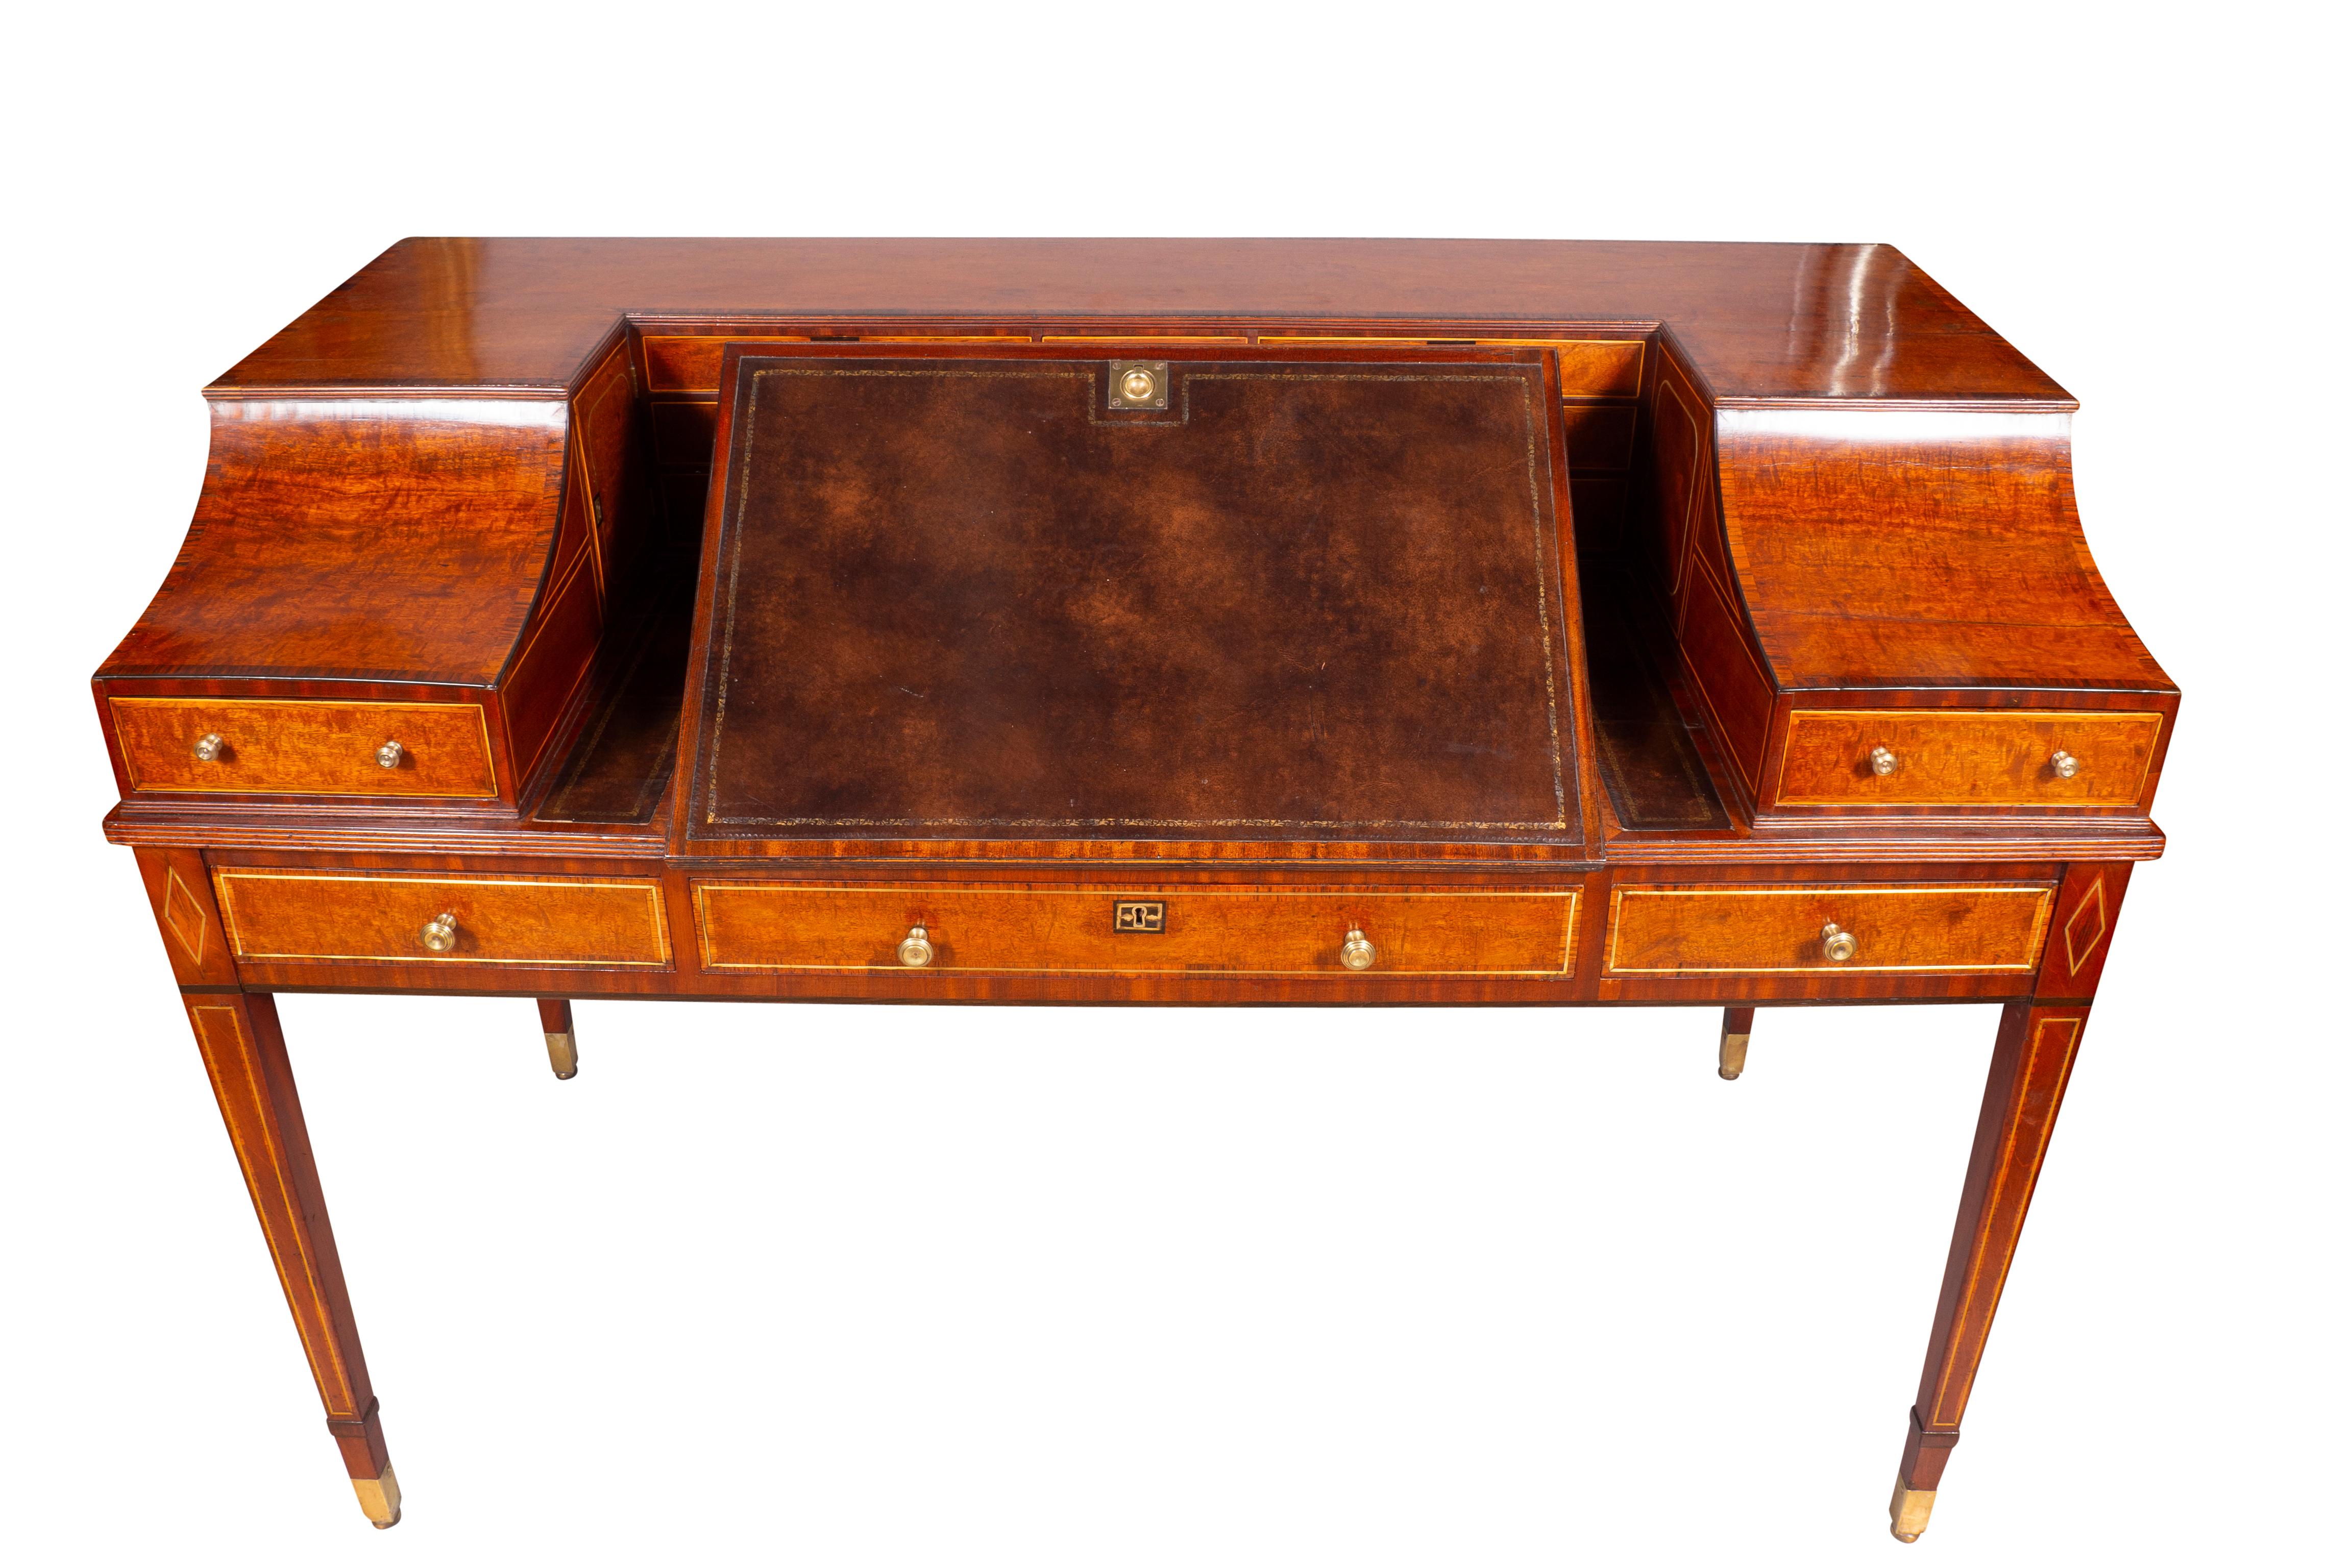 Mid-19th Century George III Style Mahogany And Brass Inlaid Carleton House Desk For Sale